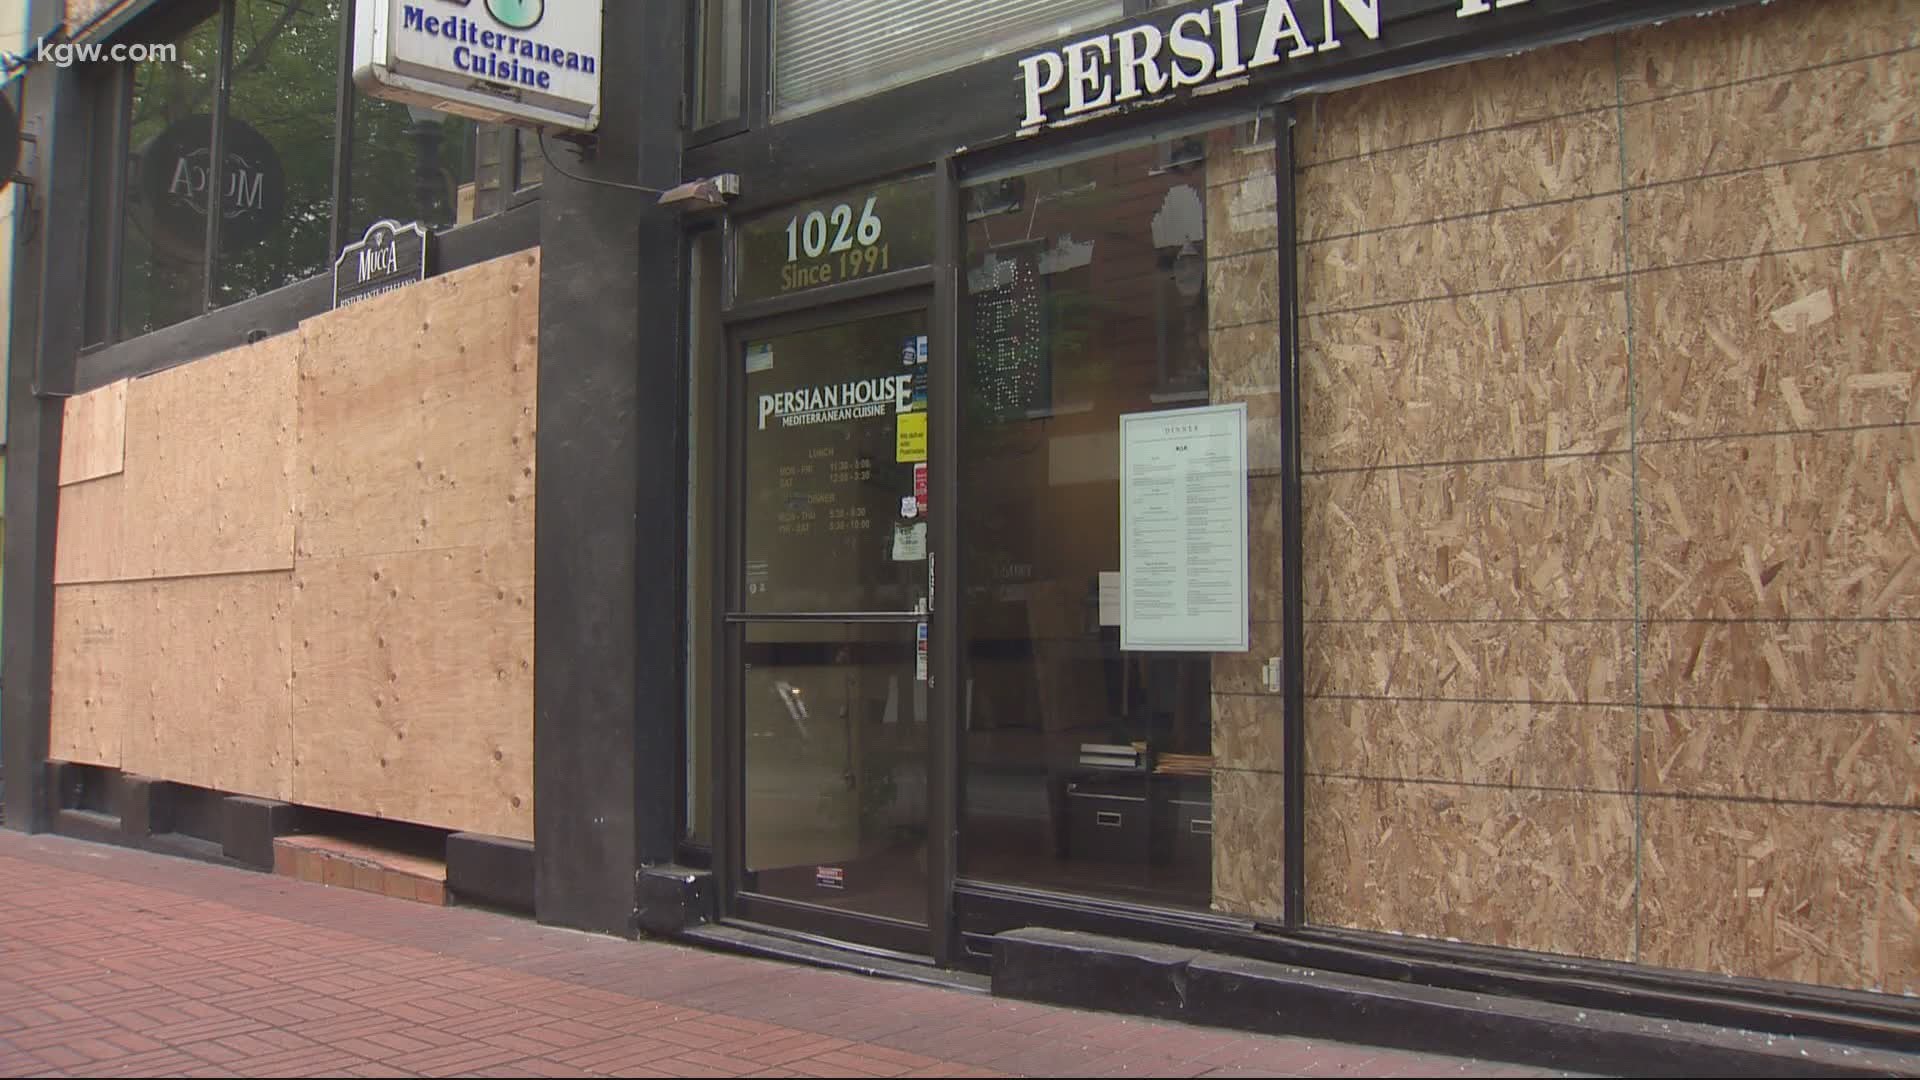 A Portland restaurant owned by an immigrant family is reeling tonight after being vandalized and looted during rioting Friday night.